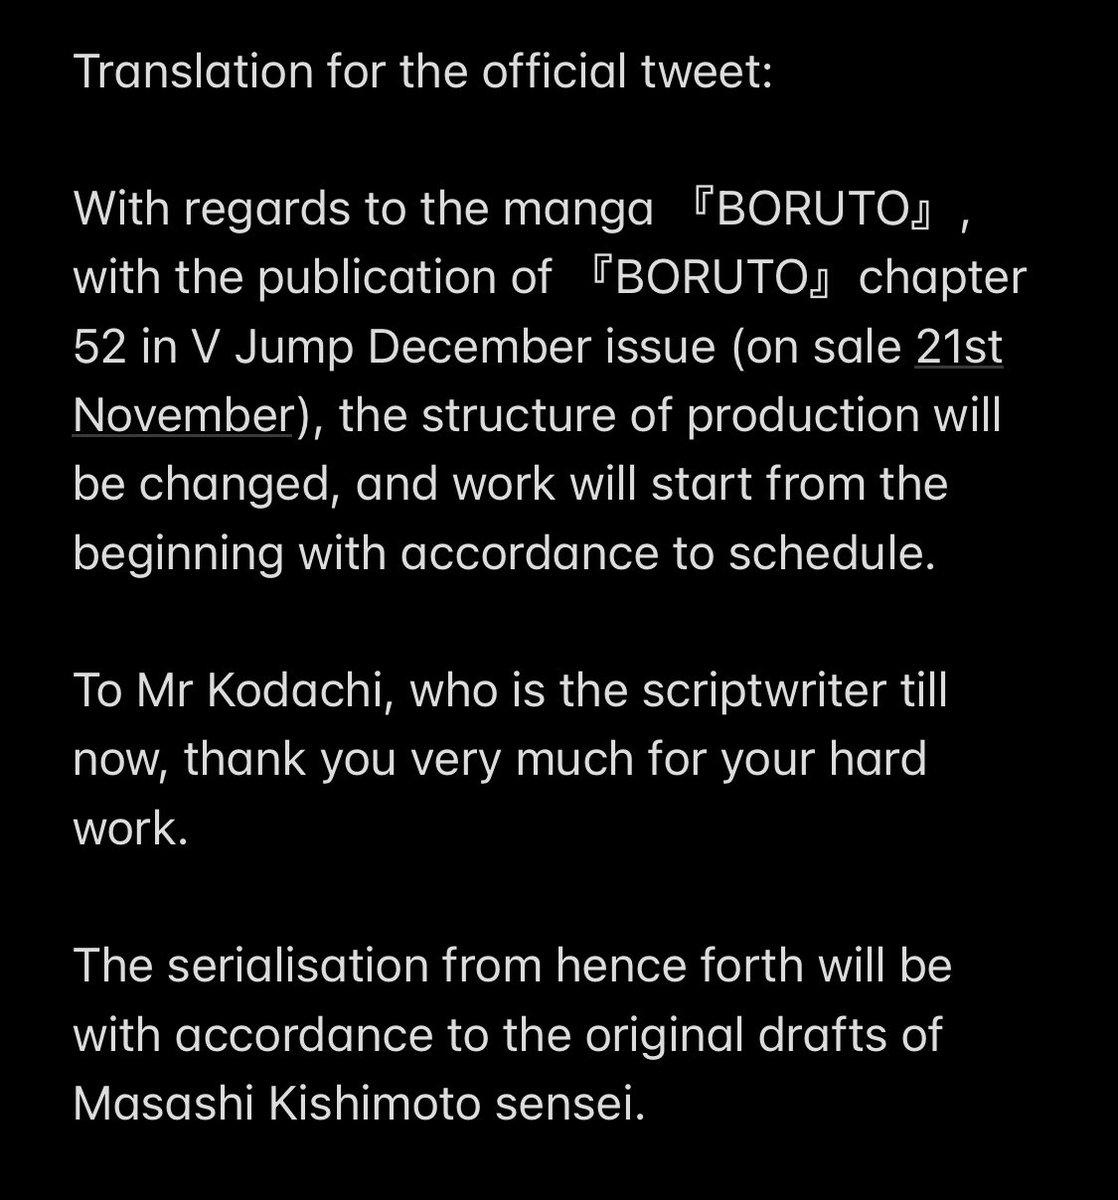 BREAKING ❗️

Masashi Kishimoto will take charge of scriptwriting the Boruto Manga starting from Boruto Chapter 53. 

Ukyo Kodachi has announced his departure from the position of scriptwriter for the Manga!!